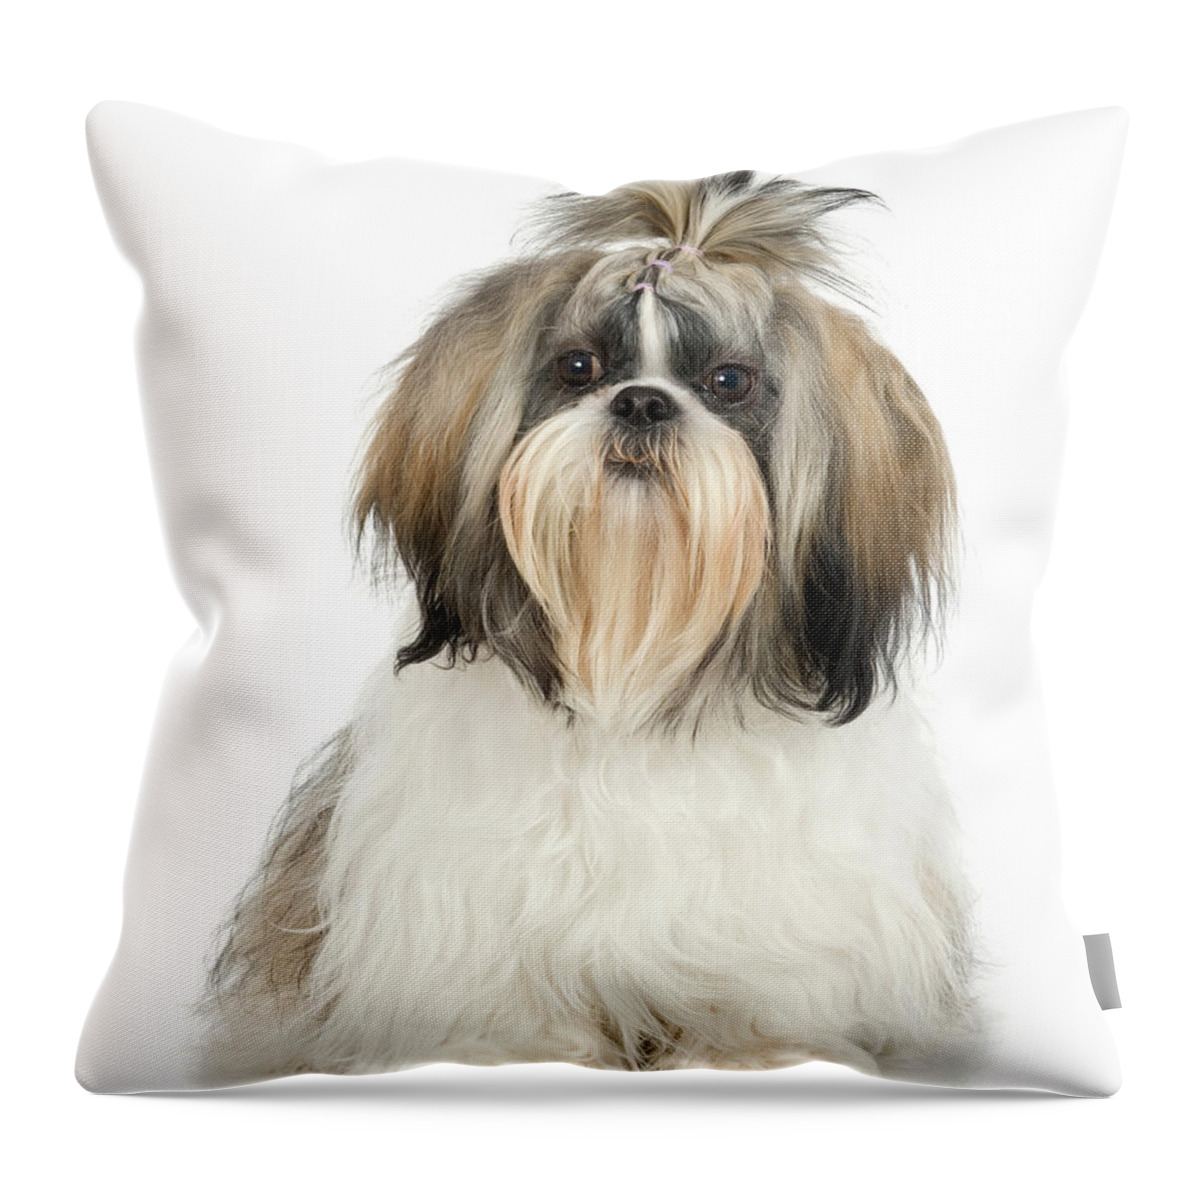 Pets Throw Pillow featuring the photograph Studio Portrait Of Shih Tzu Dog by Jupiterimages